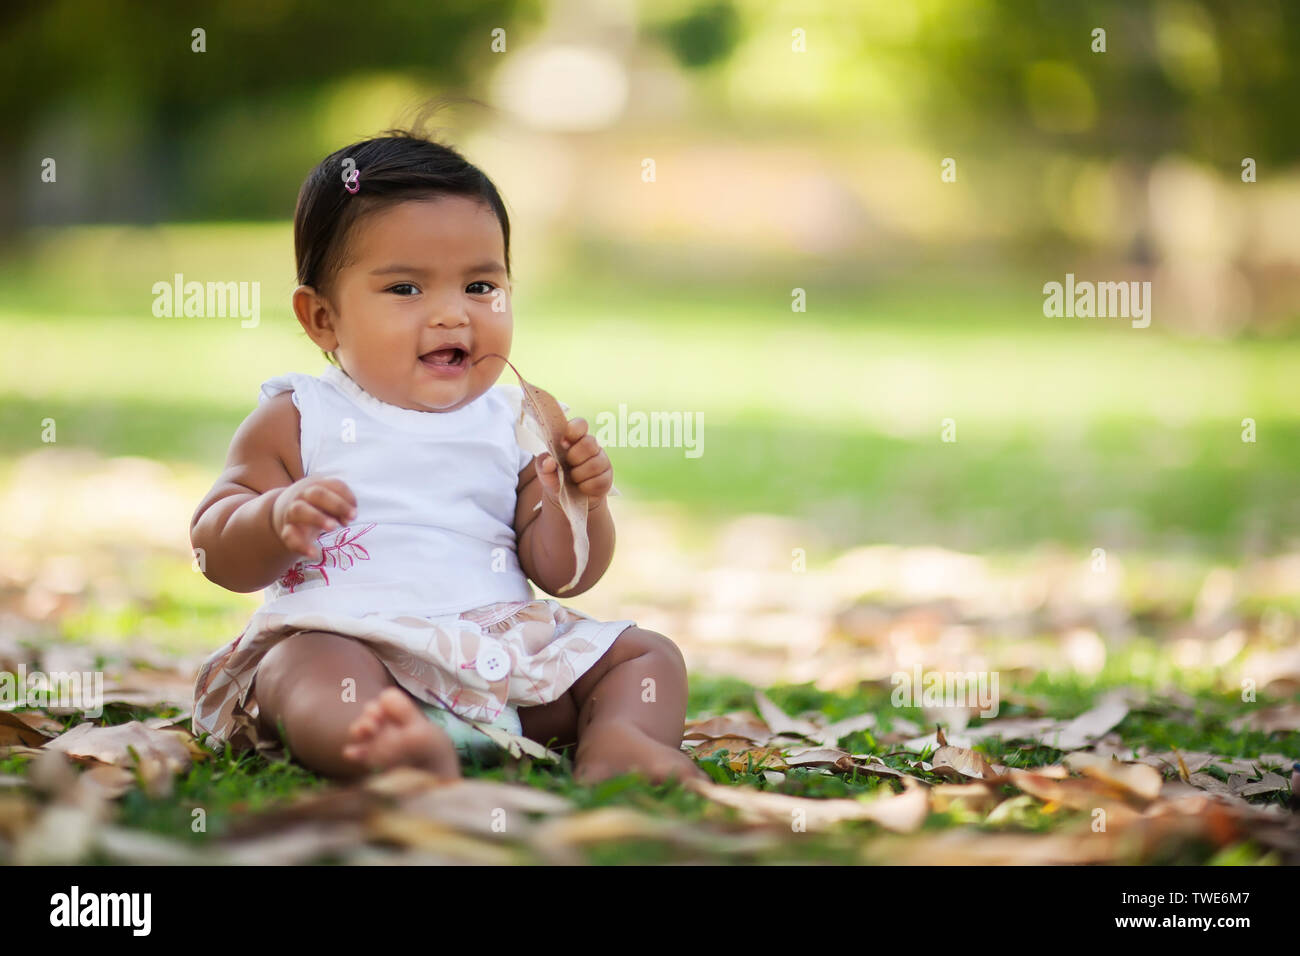 Little baby girl with a smile and grasping a dried leaf and putting it to her mouth for chewing. Stock Photo